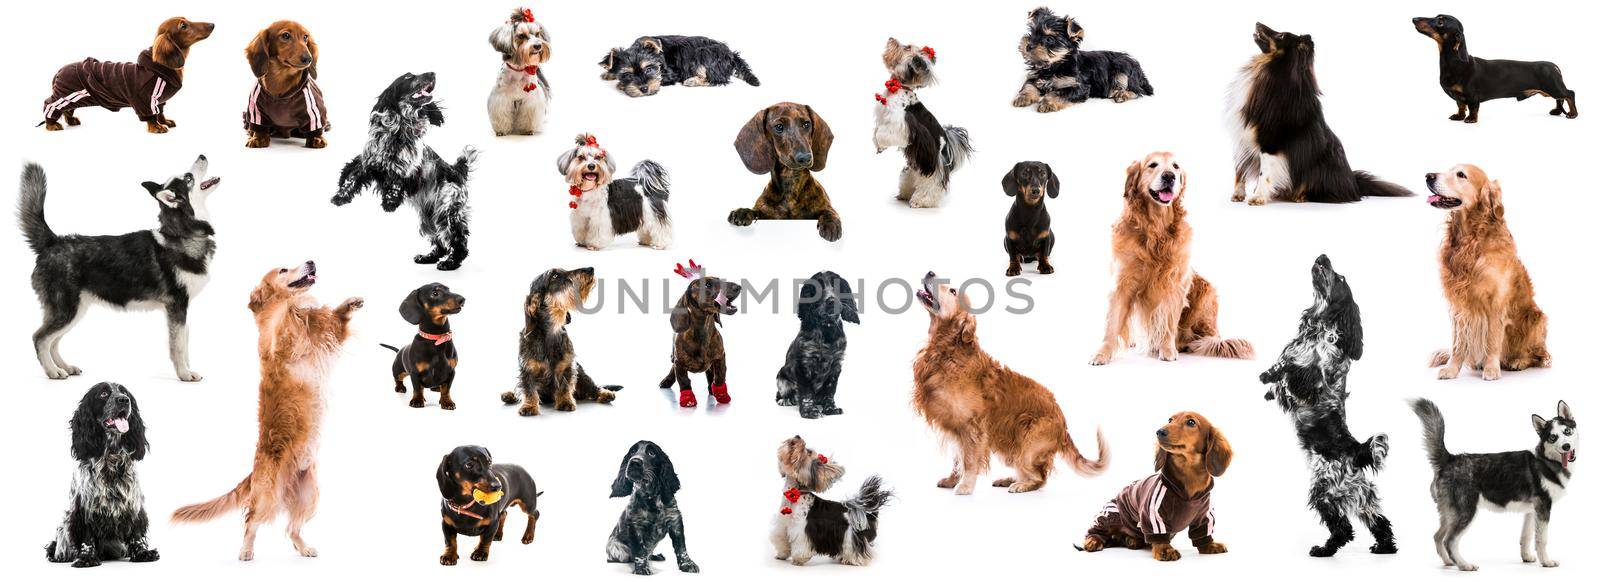 set photo of dogs of different breeds isolated by tan4ikk1